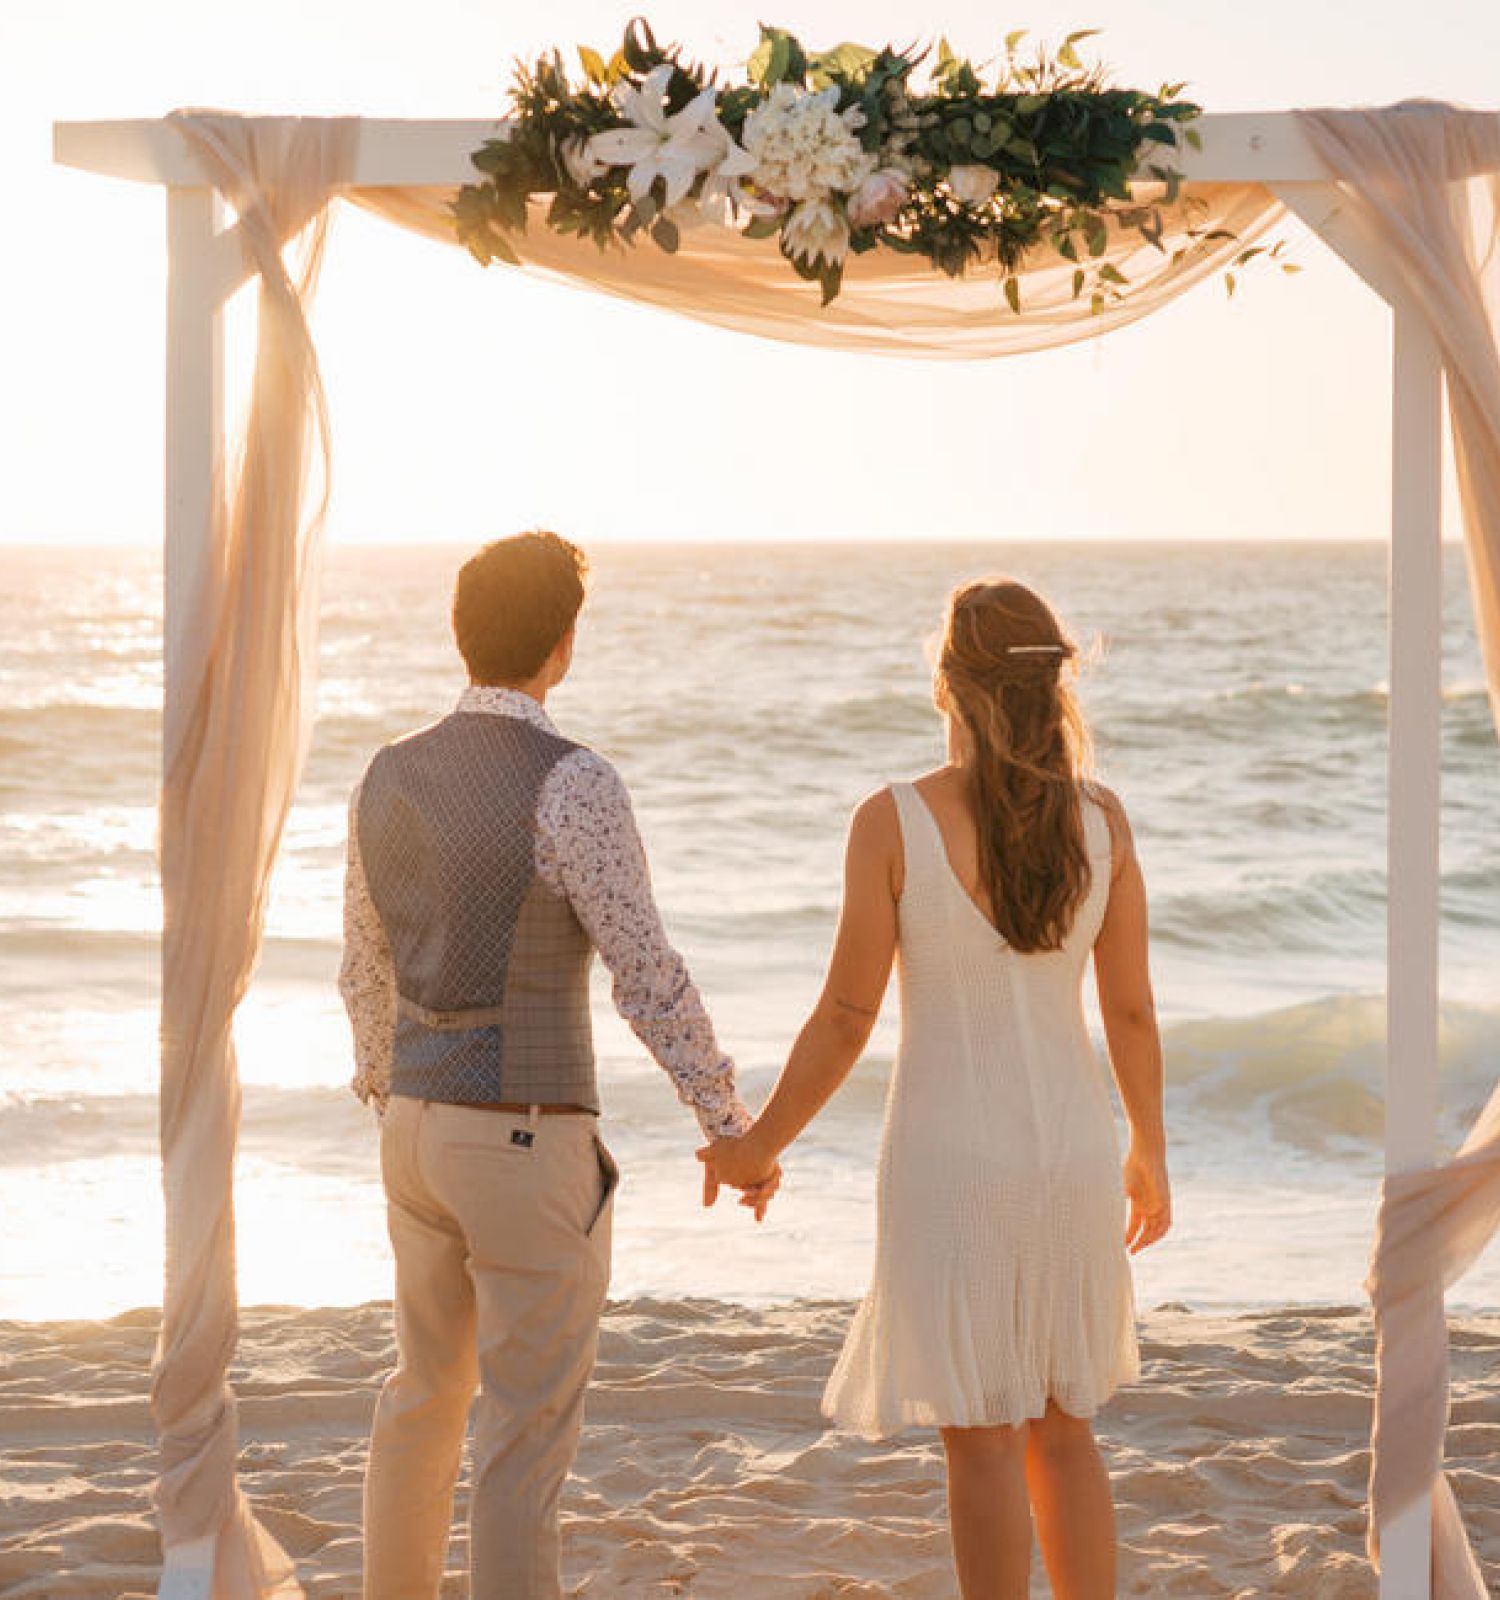 Two people hold hands under a floral arch on a beach at sunset.